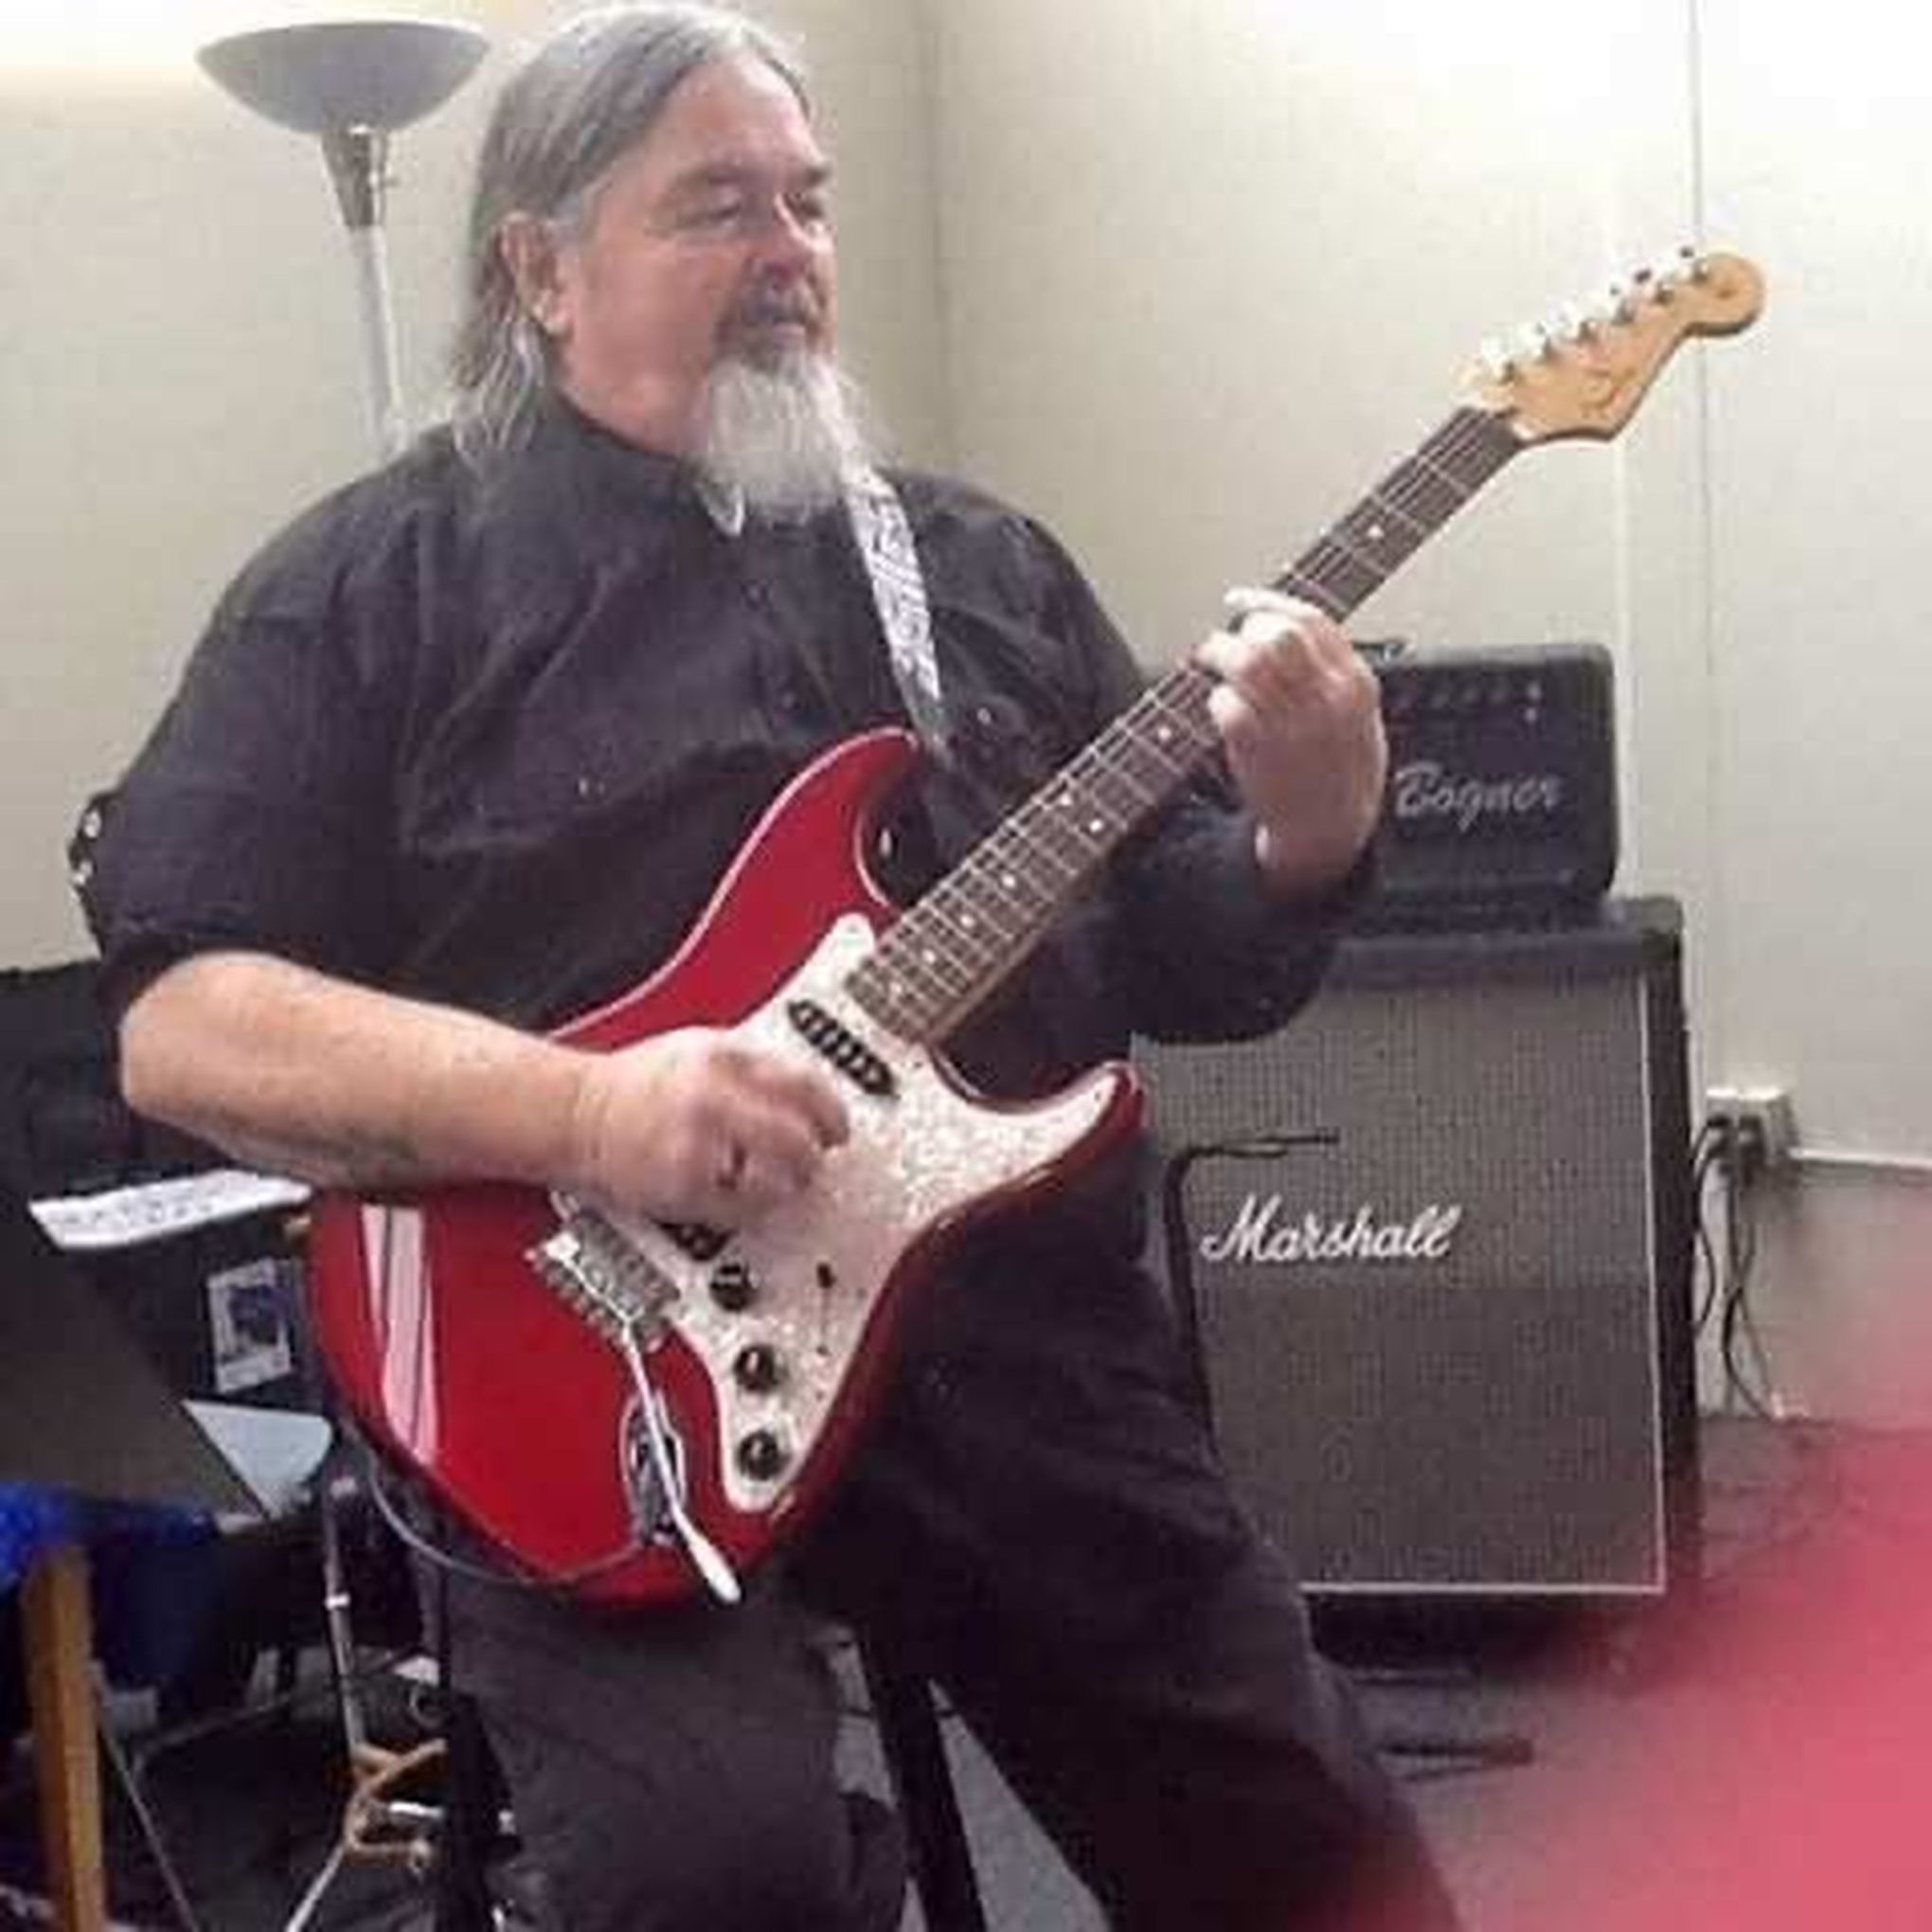 Kenny Williams playing a red electric guitar